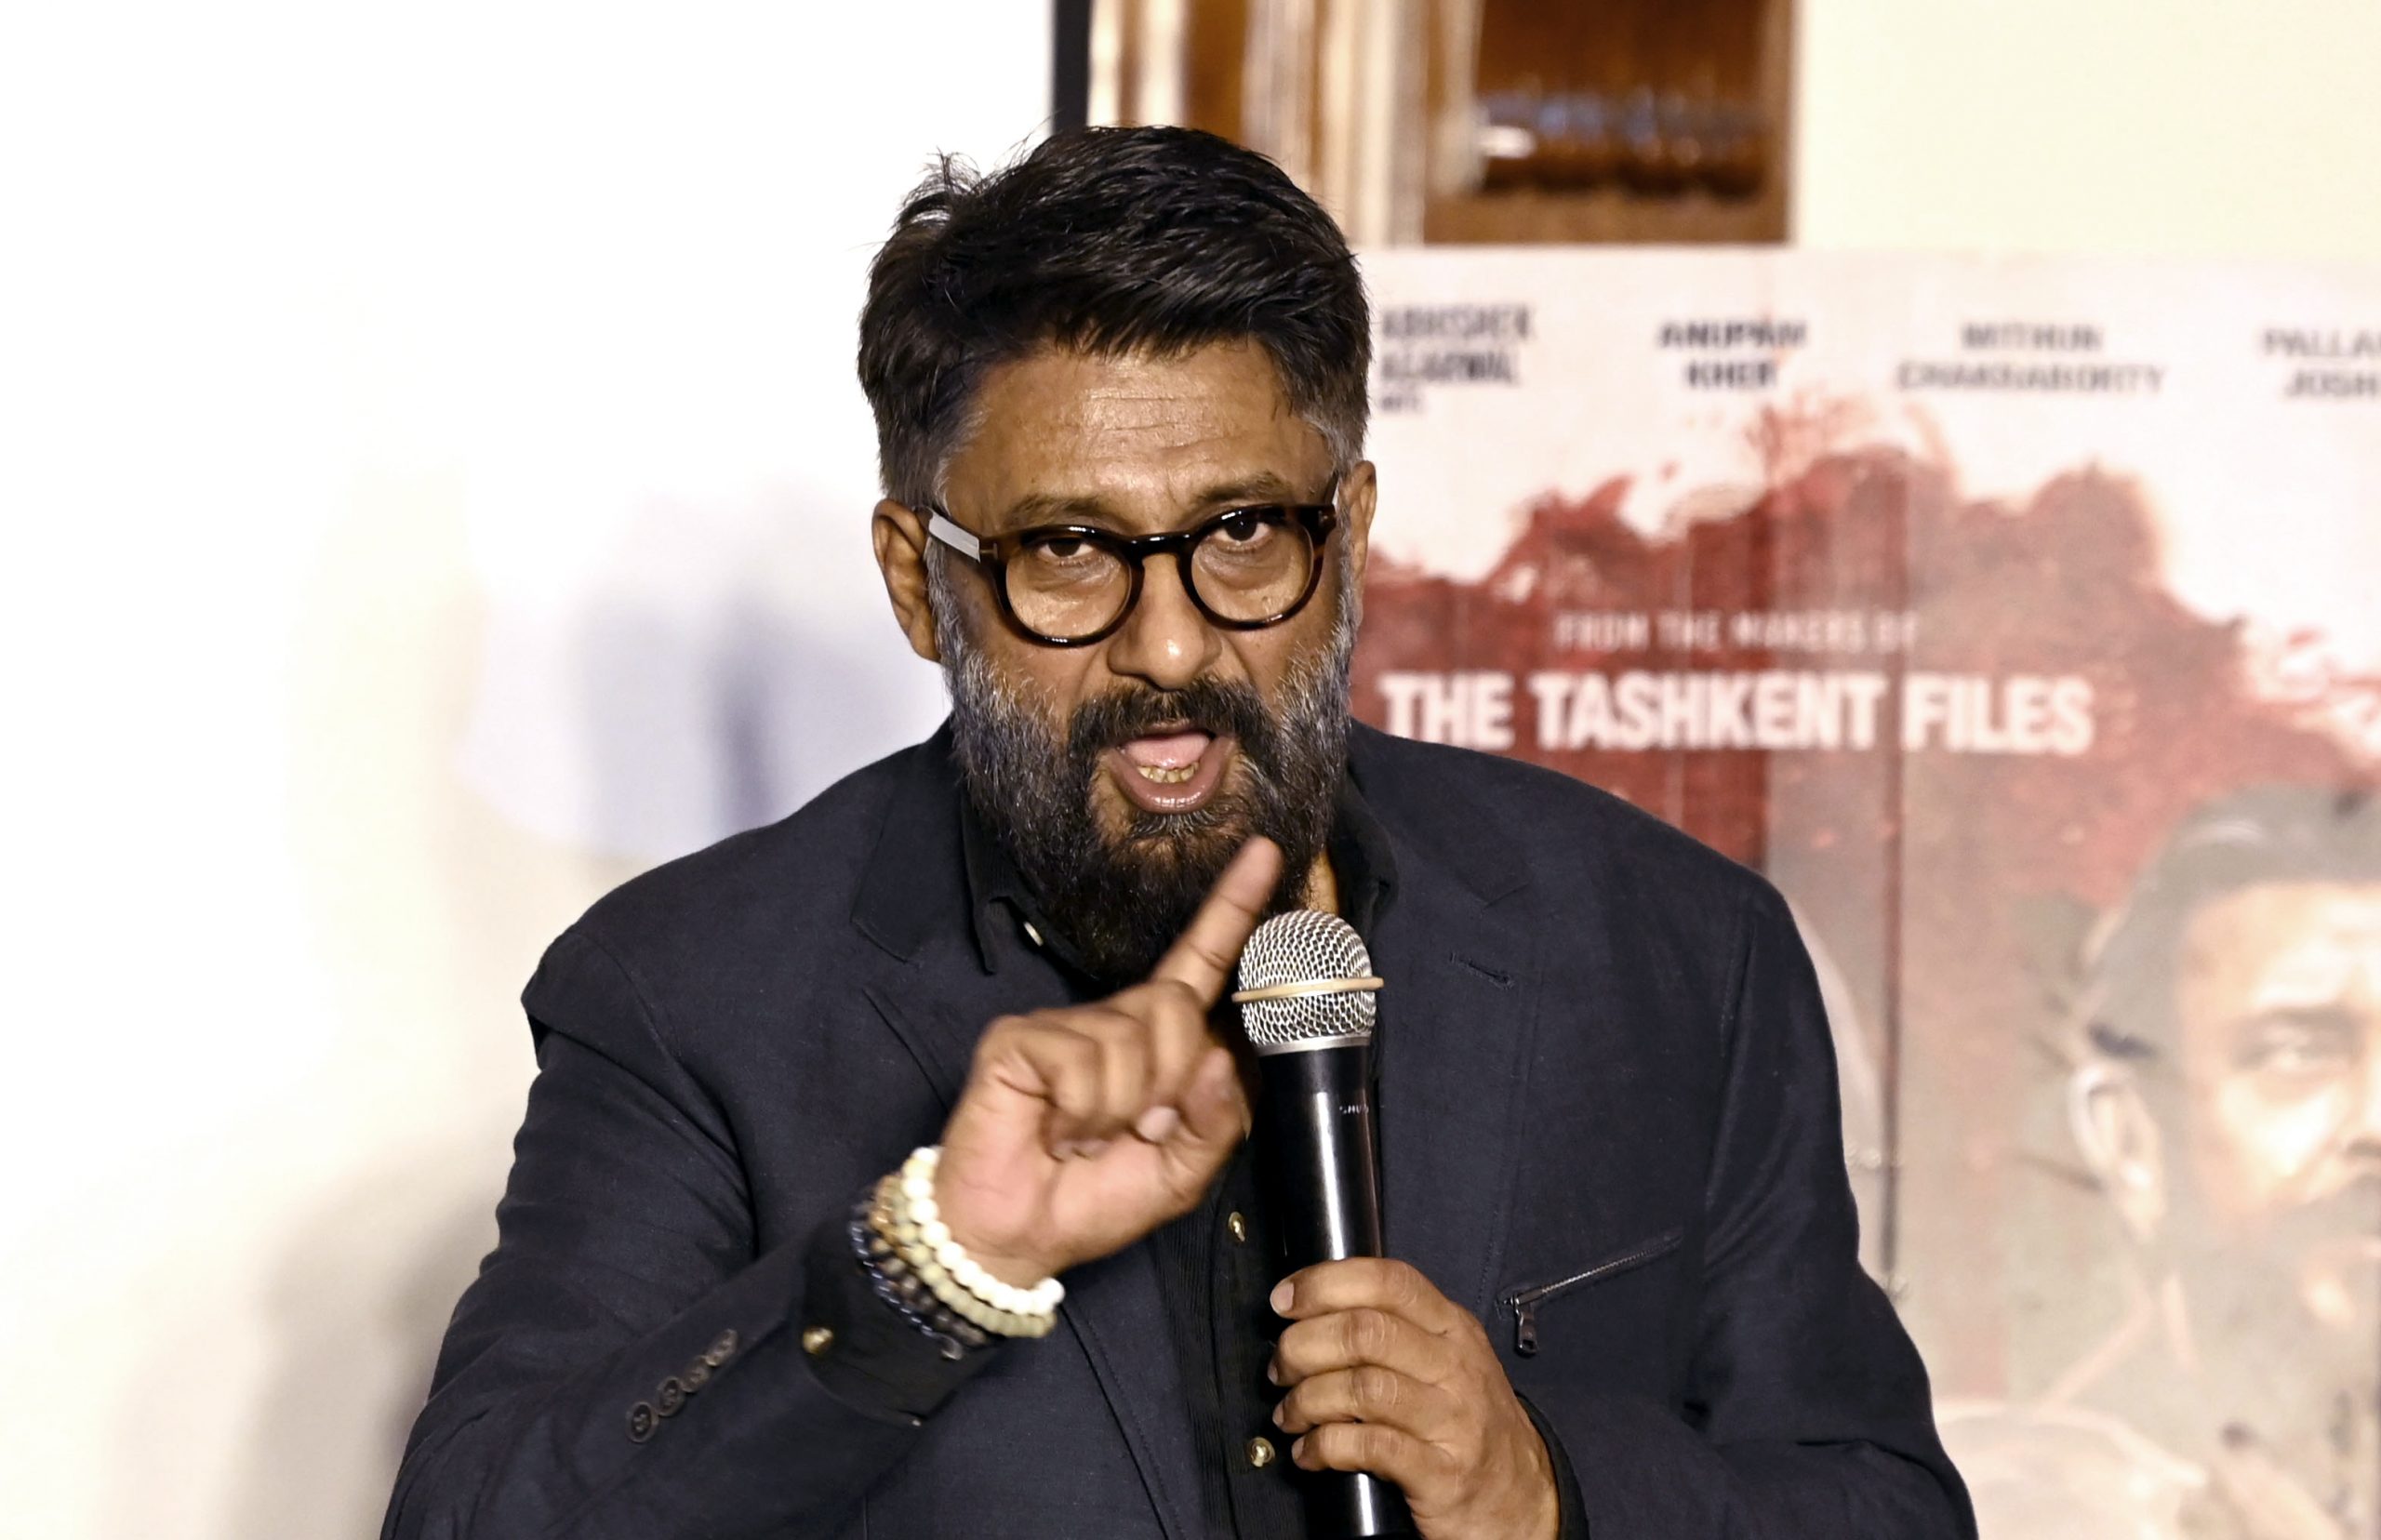 ‘The Kashmir Files’ director Vivek Agnihotri gets ‘Y’ category security